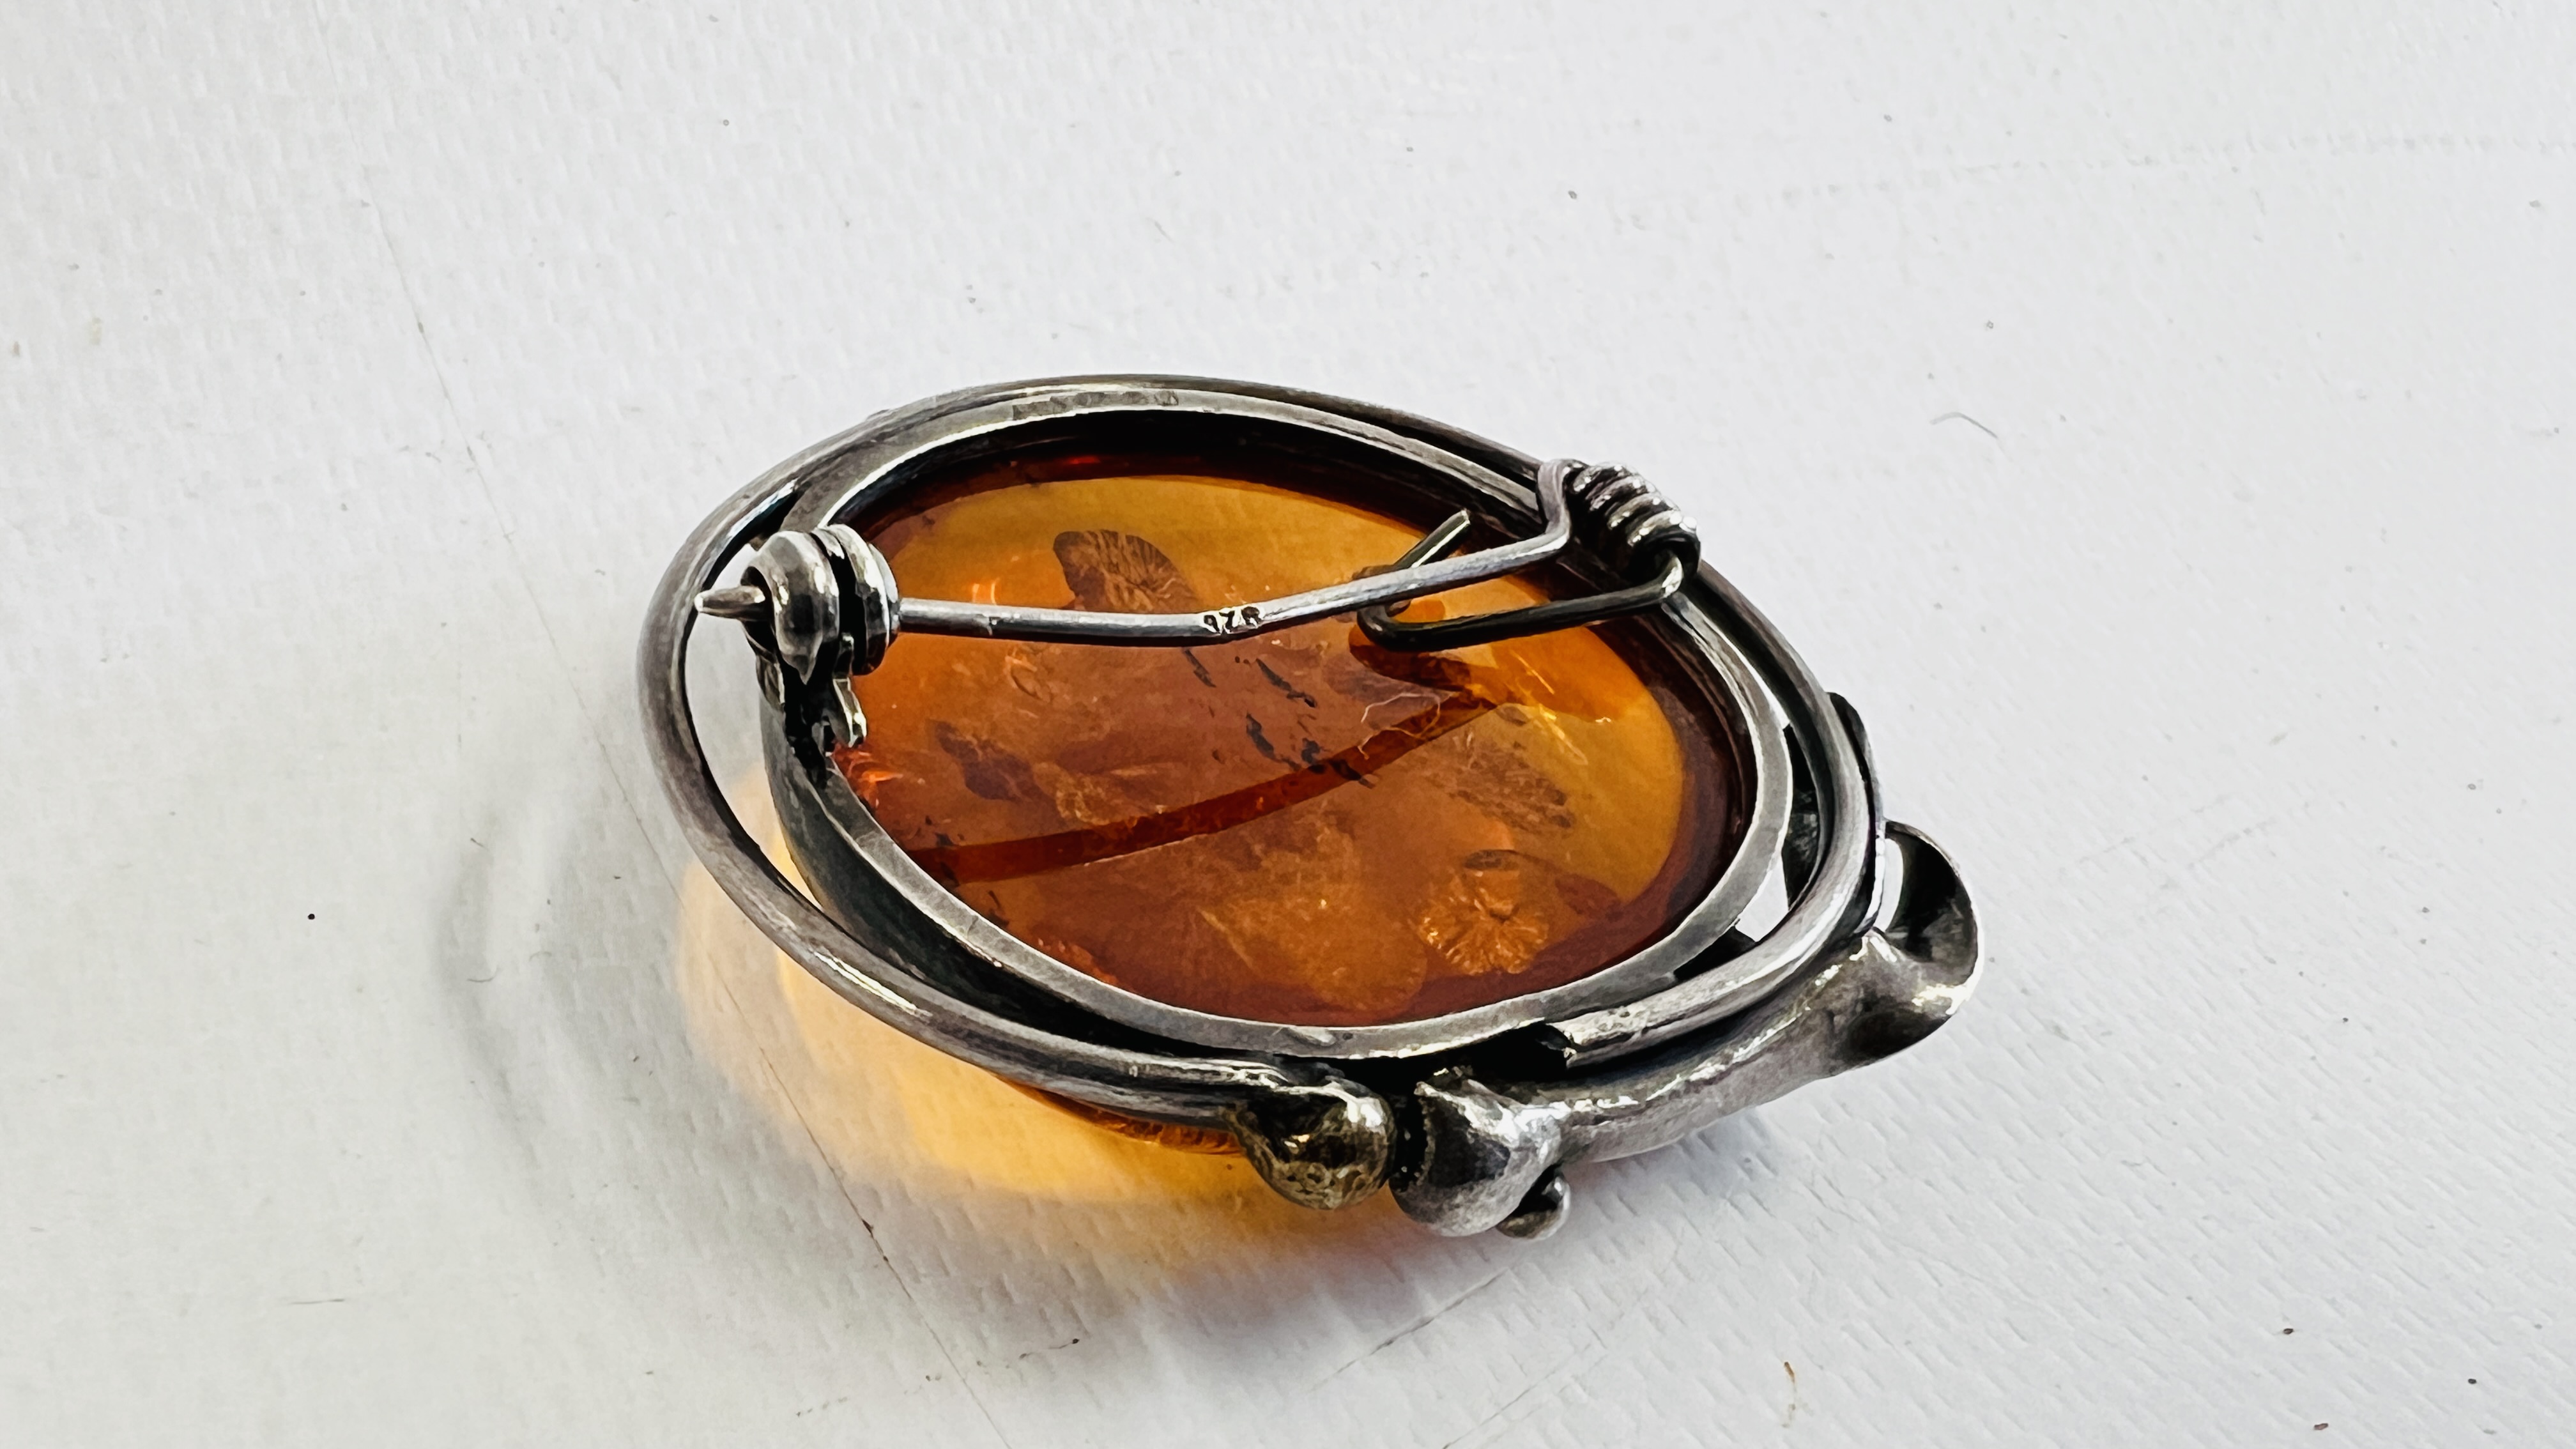 A VINTAGE SILVER BROOCH INSET WITH AN AMBER TYPE STONE. - Image 5 of 5